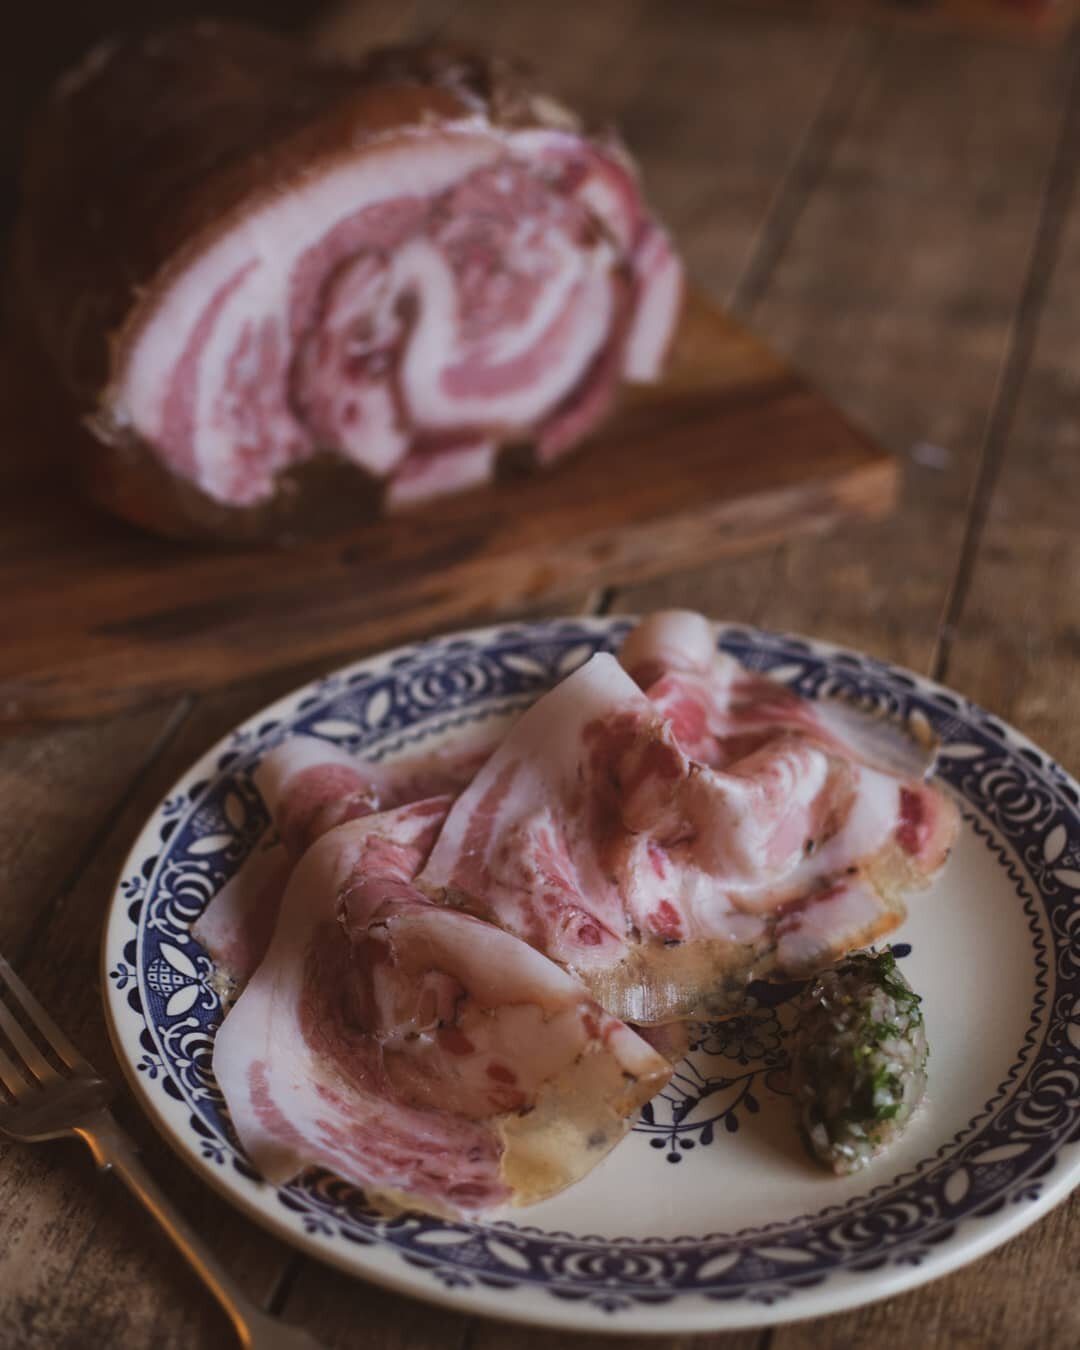 Porchetta di Testa with vinegered shallots and parsley.

A quintessential Italian peasant preparation of a fresh pig's head. The heads of our British Lops have been deboned, cured in salt and spices before being tightly rolled, tied and cooked very g